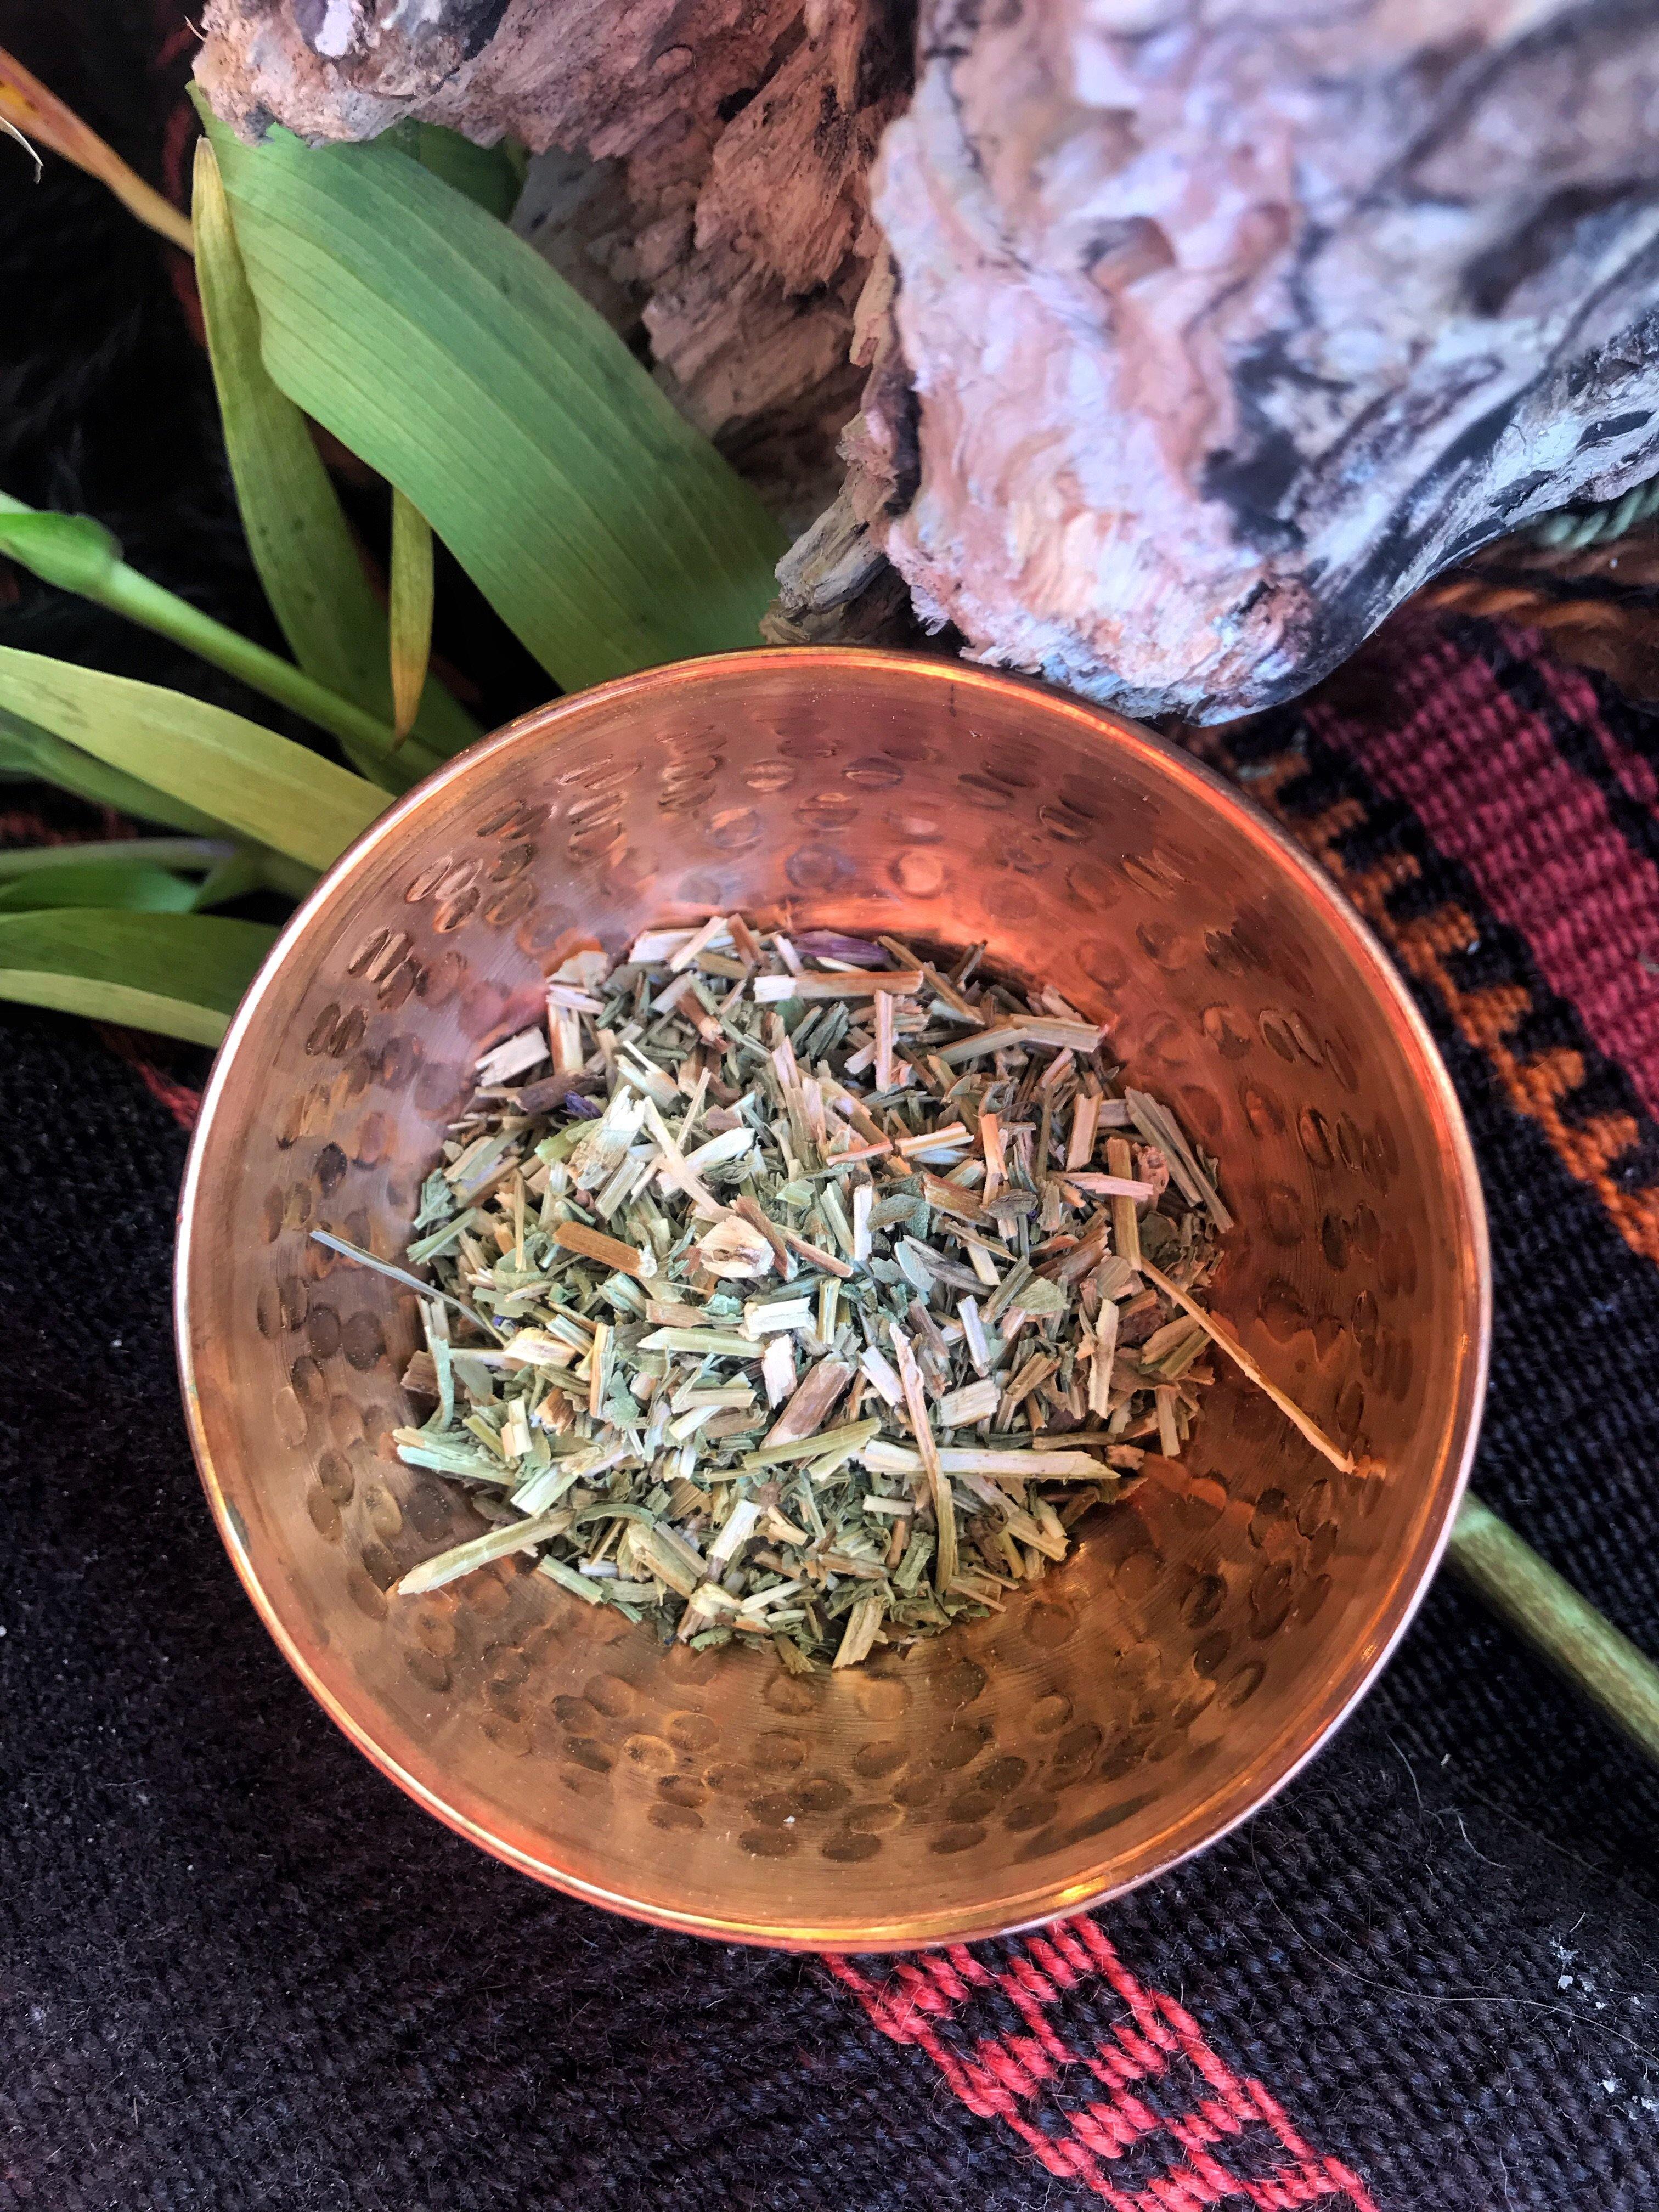 Hyssop (Hyssopus officinalis) - Witching Herbs - Keven Craft Rituals